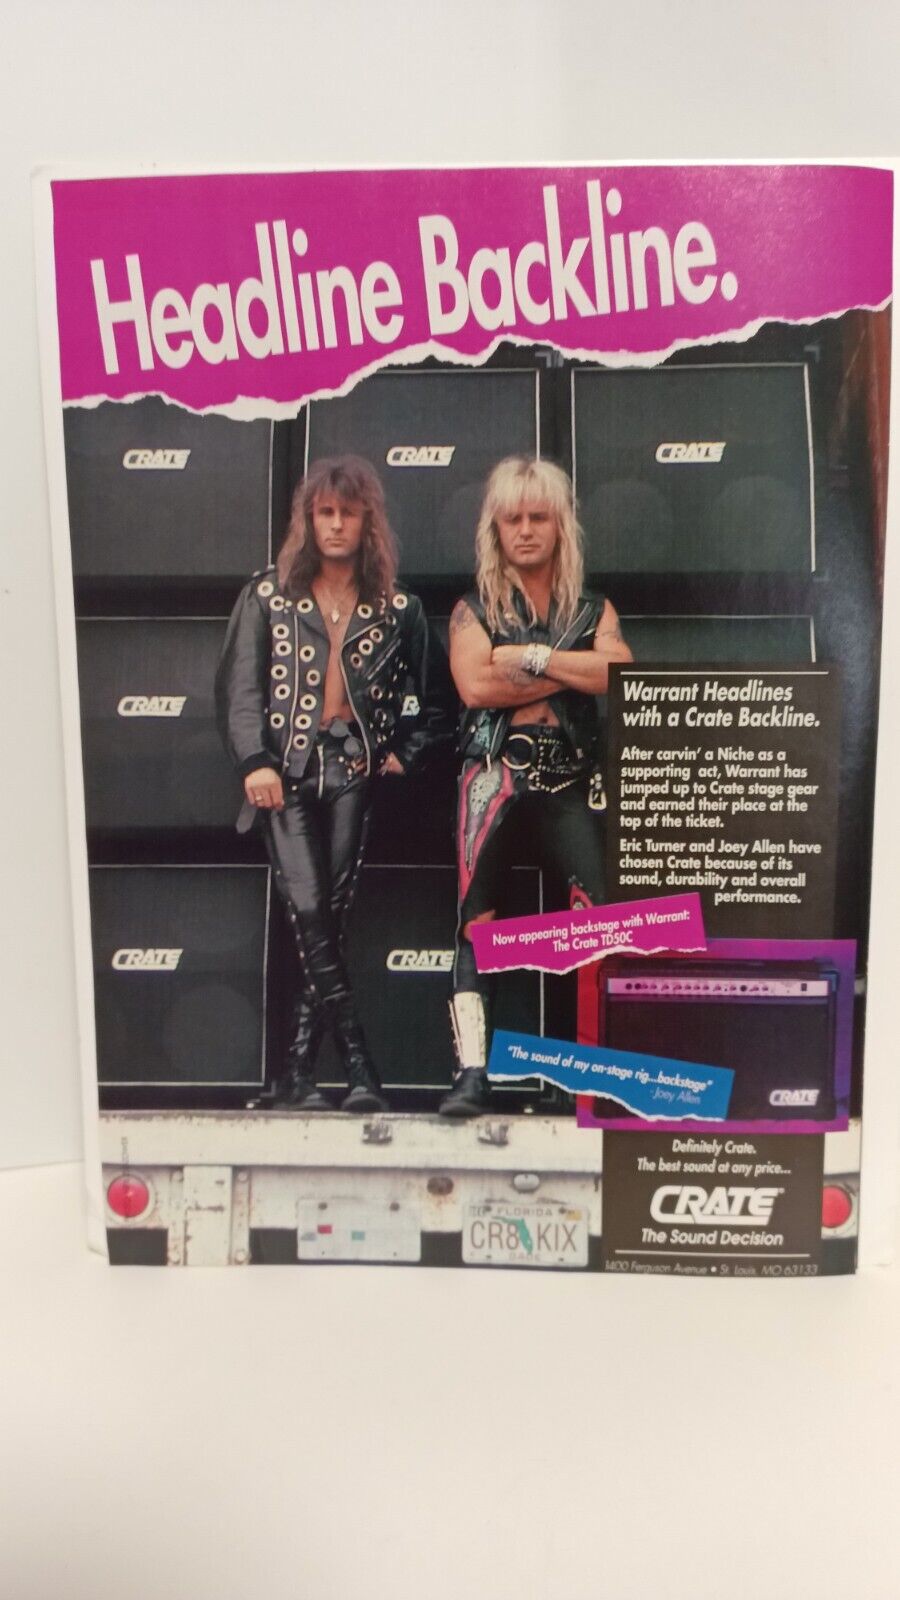 CRATE GUITAR AMPLIFIERS  ERIC TURNER OF WARRANT  , 11X8.5 - PRINT AD. x3